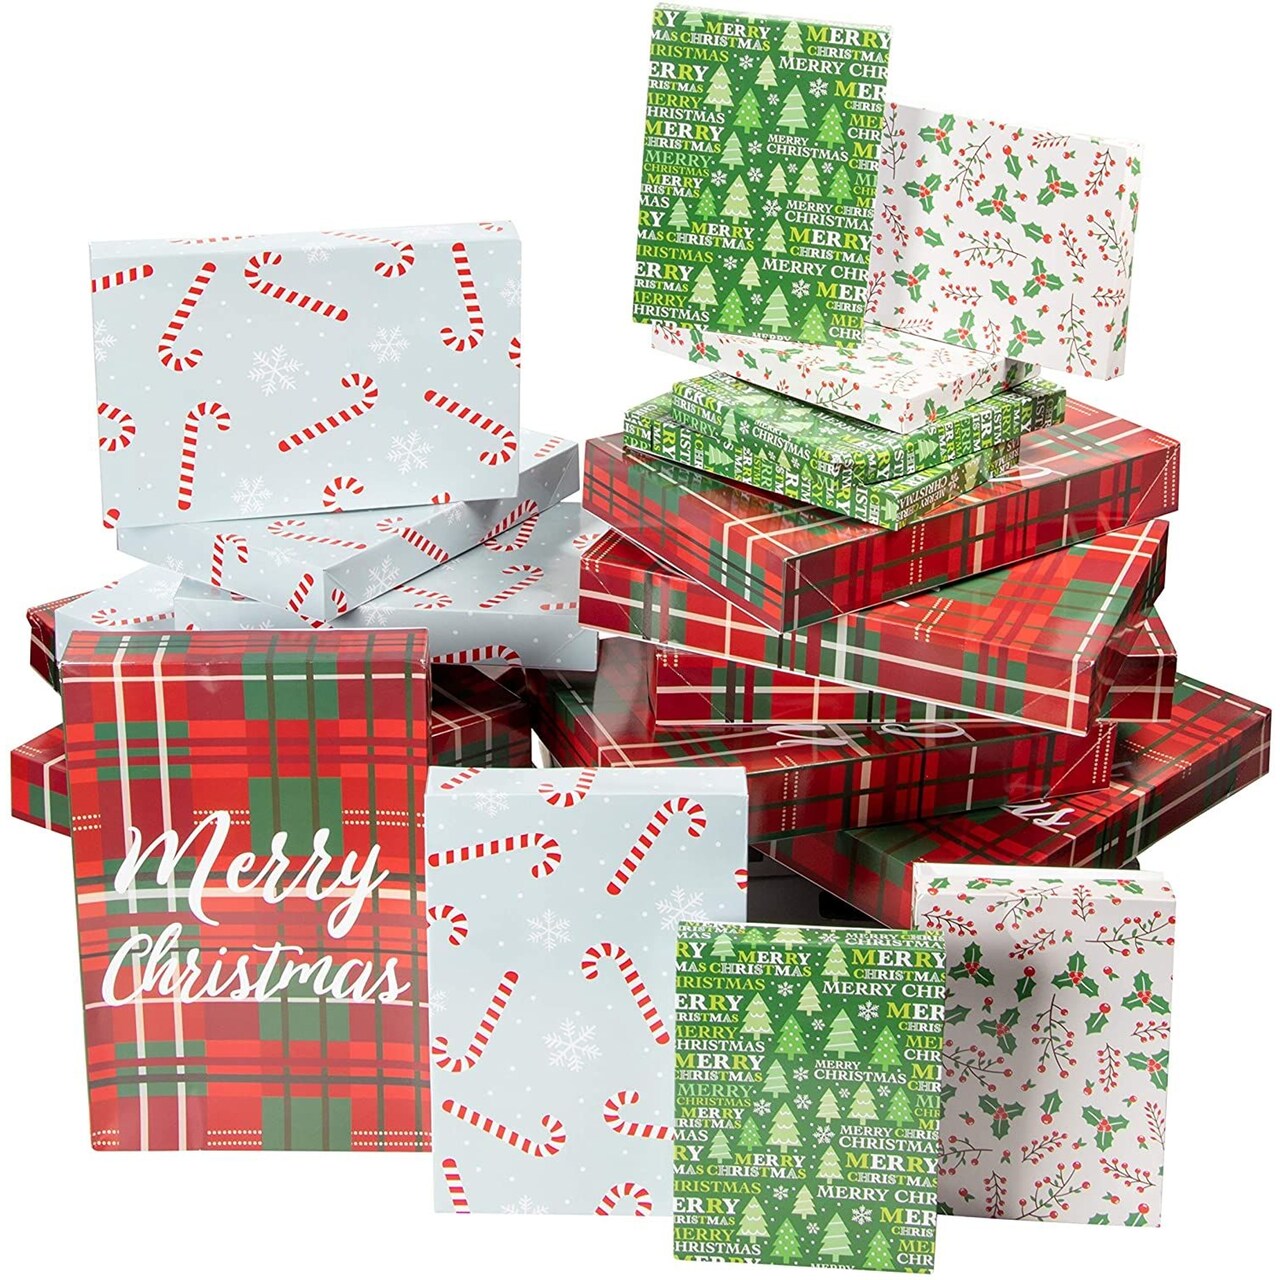 48 Pack Empty Christmas Gift Boxes with Lids for Xmas Presents Wrapping, 3 Sizes, 4 Festive Holiday Designs